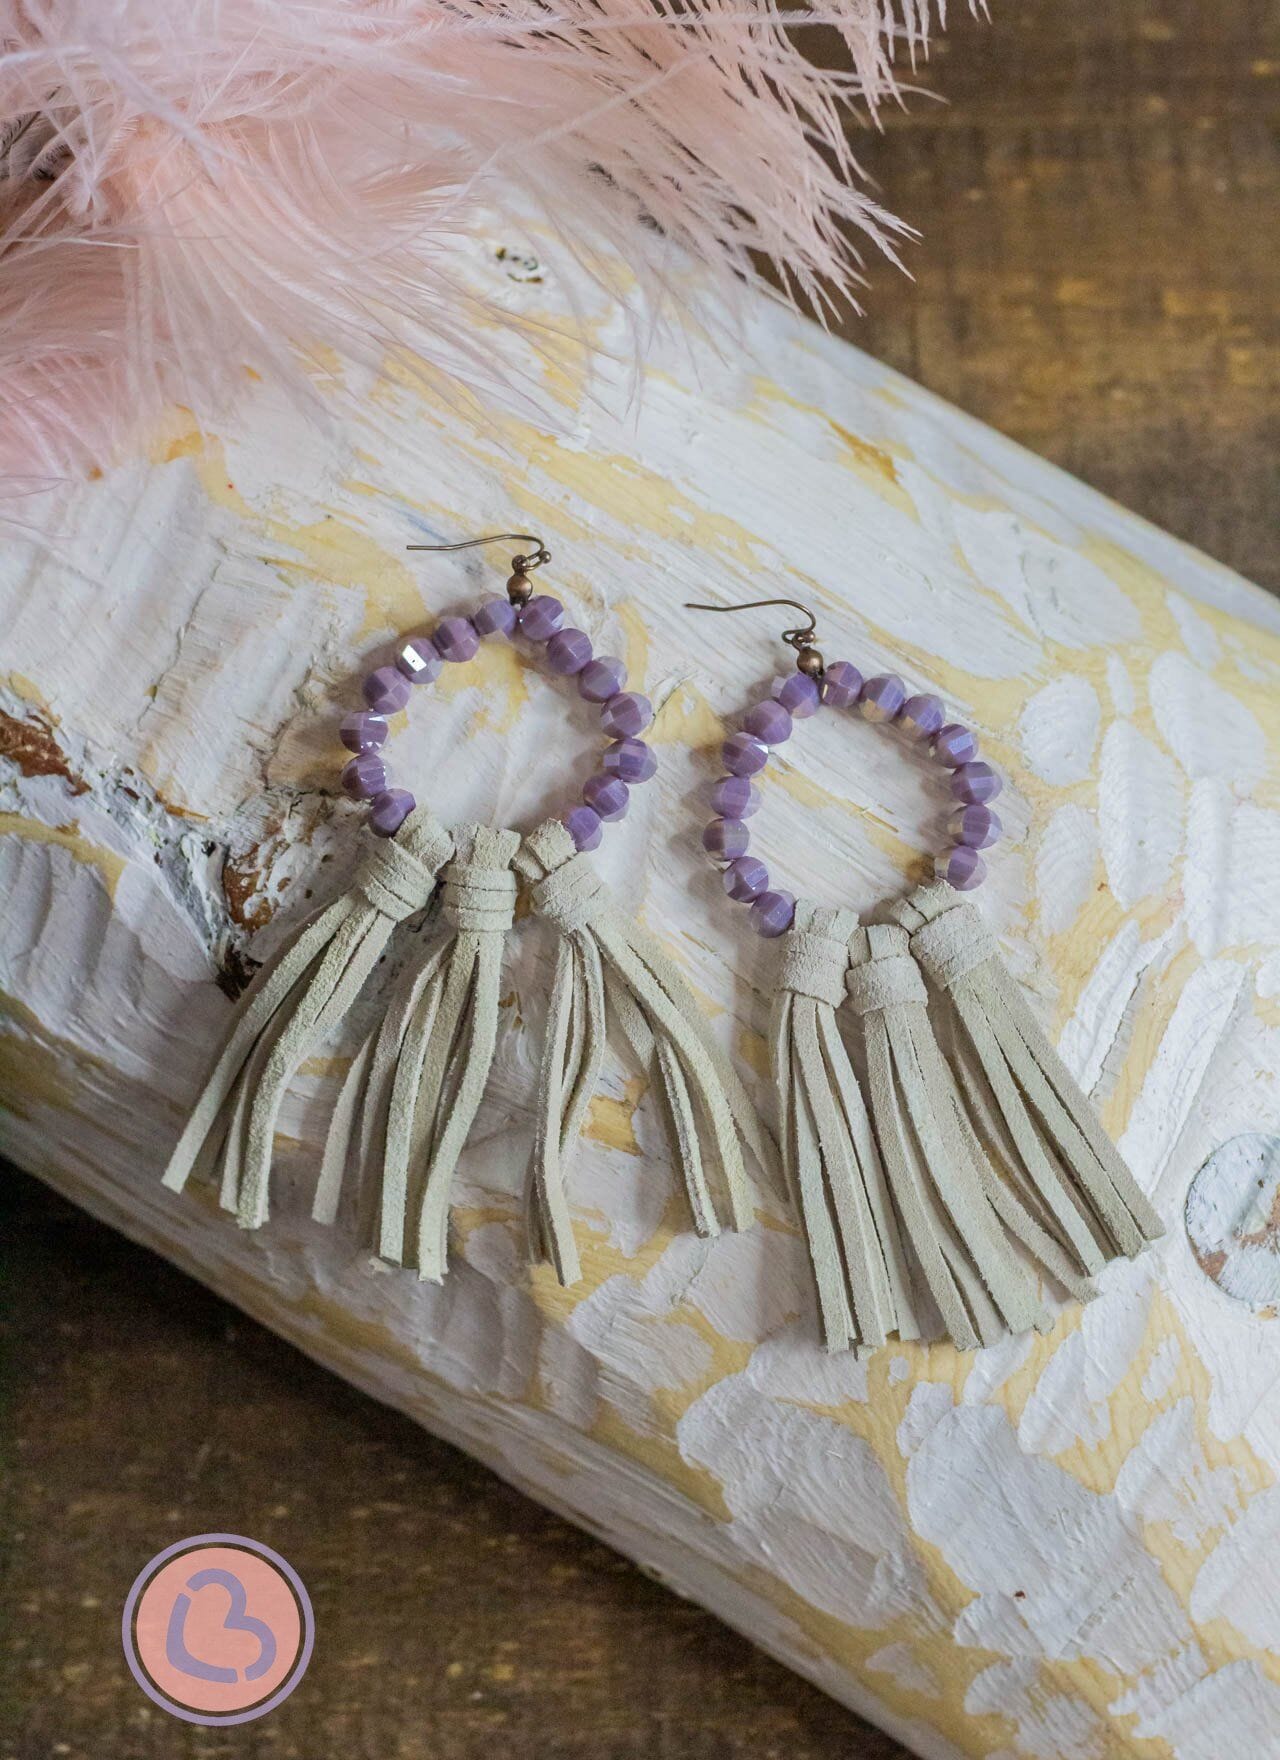 Willa Leather Tassel Earrings With Lavendar Beads and Tan Tassels Jewelry 18 